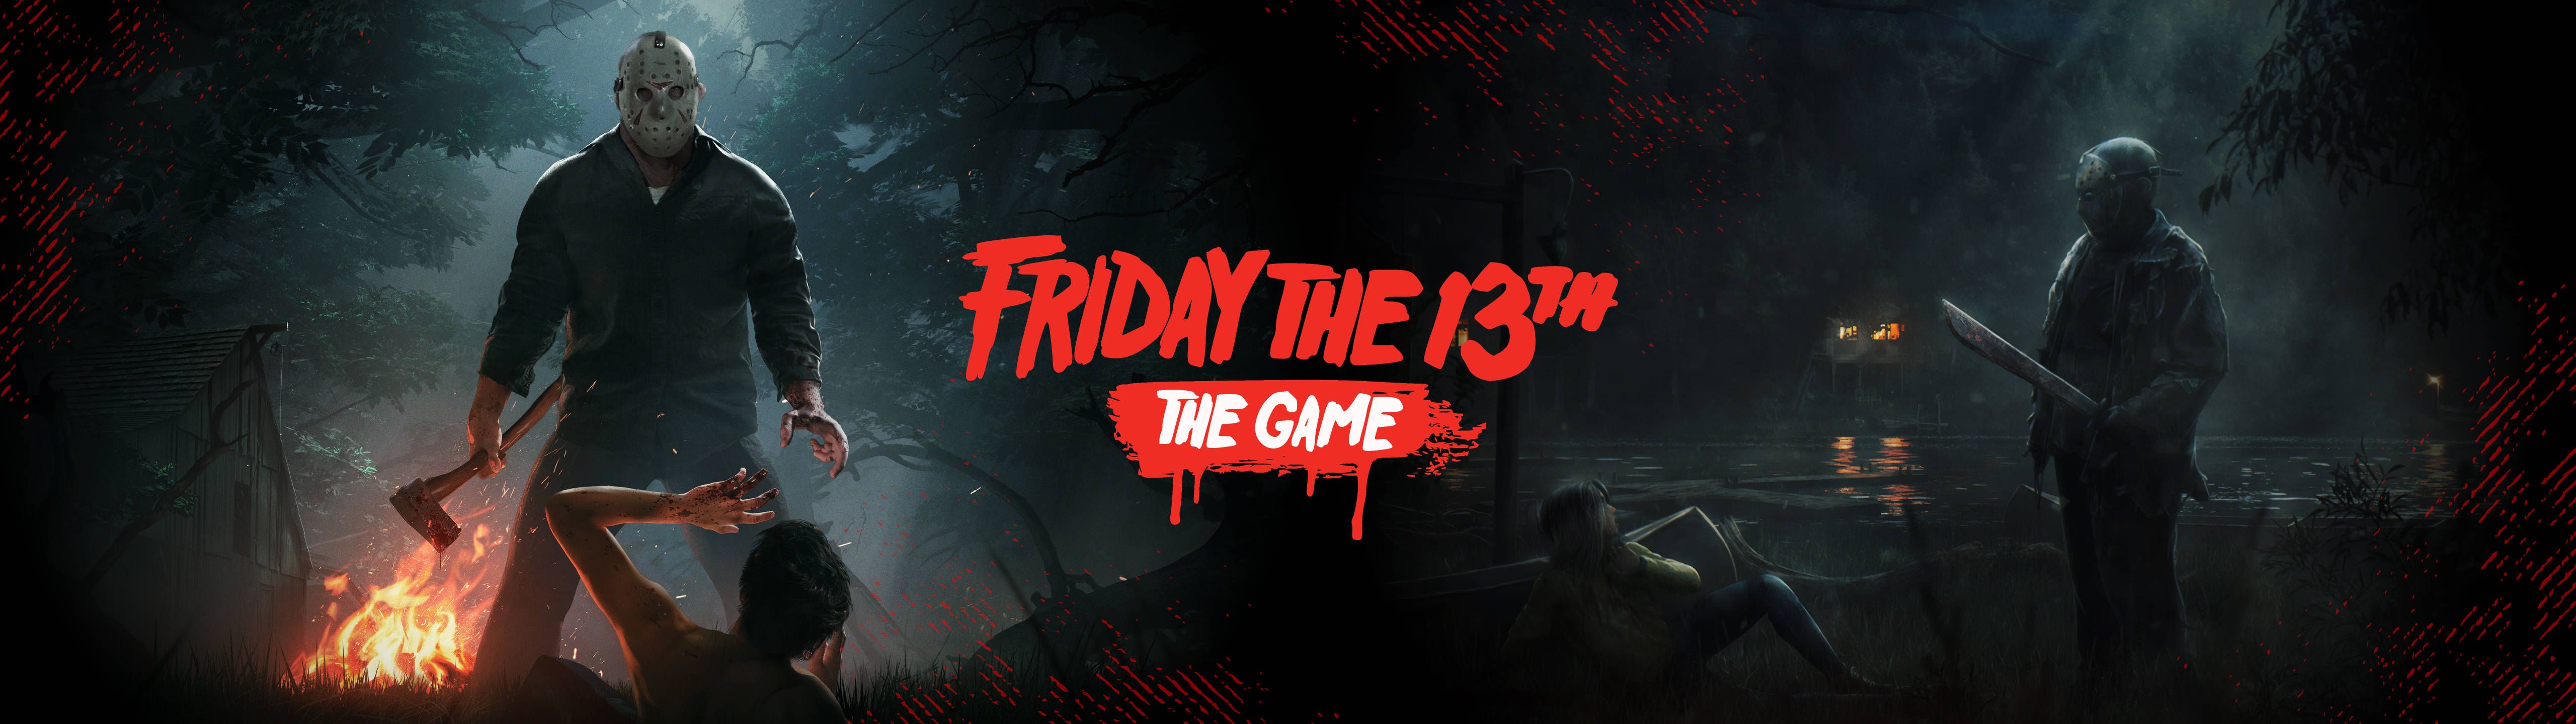 Friday the 13th: The Game - Available now on Xbox One, PlayStation 4, and PC. - 5120x1440